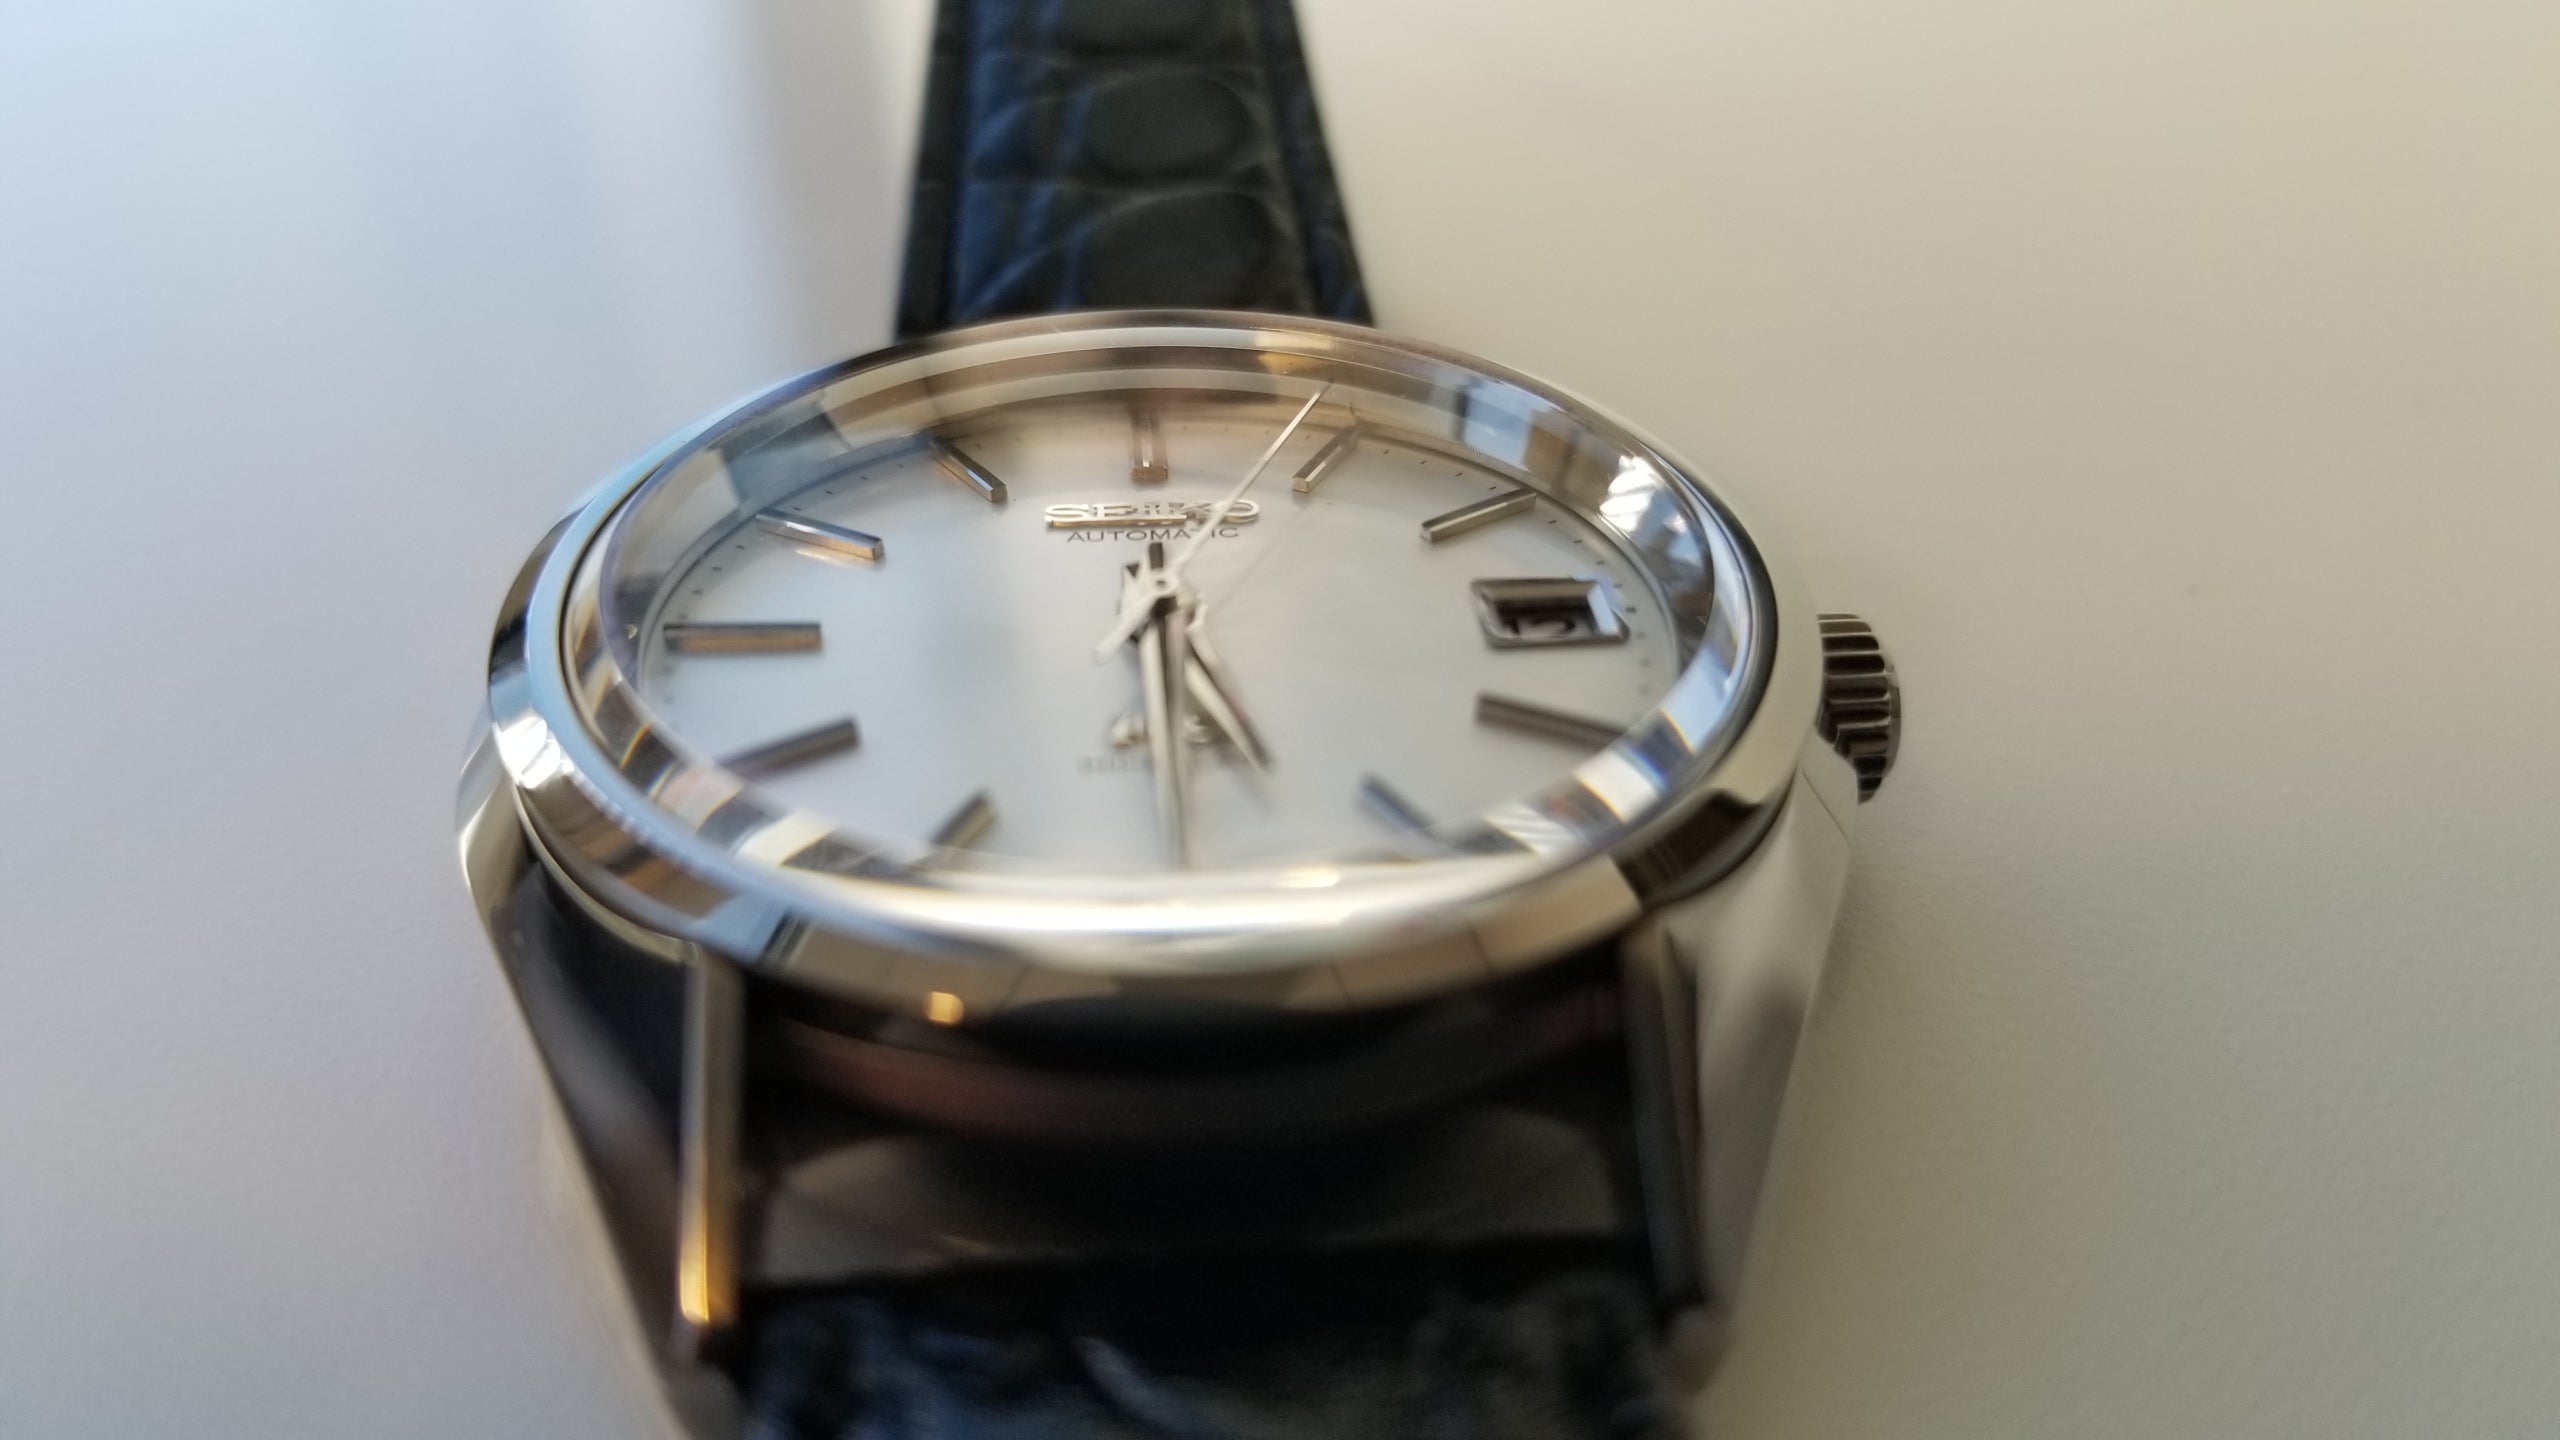 FS: Very Rare Seiko SCVN001 Limited Edition King Seiko Re-Issue |  WatchUSeek Watch Forums